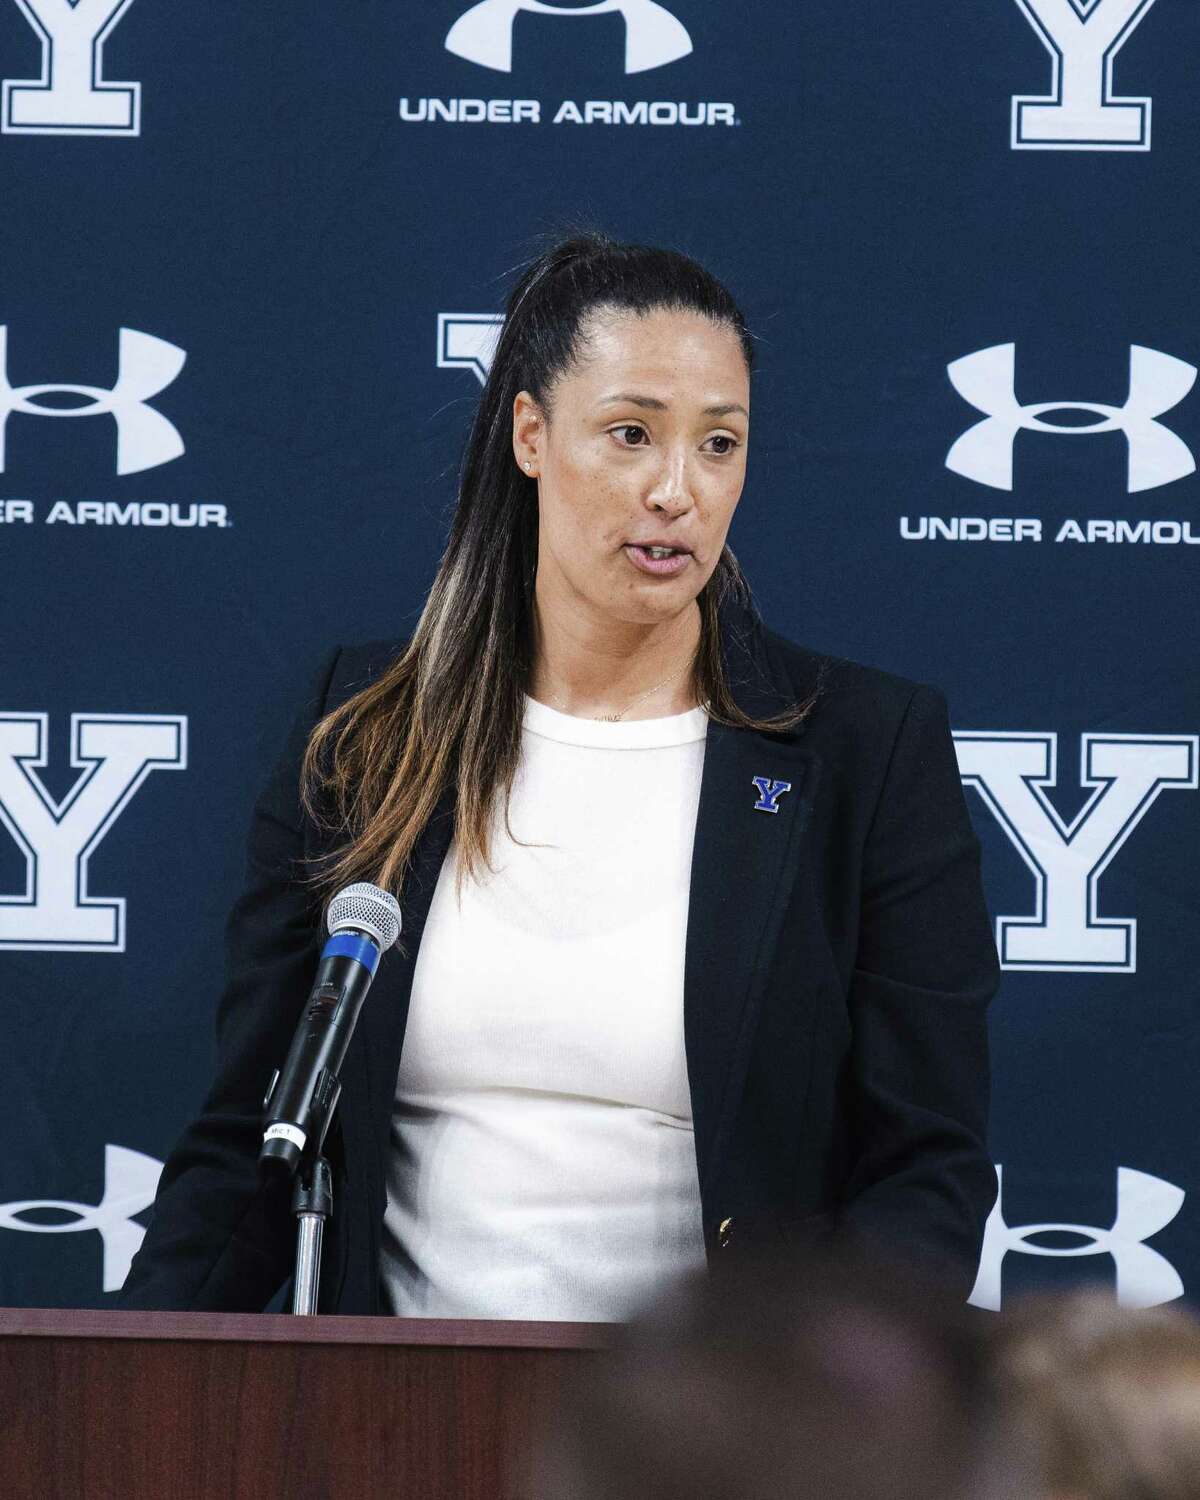 Yale women’s basketball coach Dalila Eshe spent the past nine years as an assistant, including the past three seasons at Princeton.